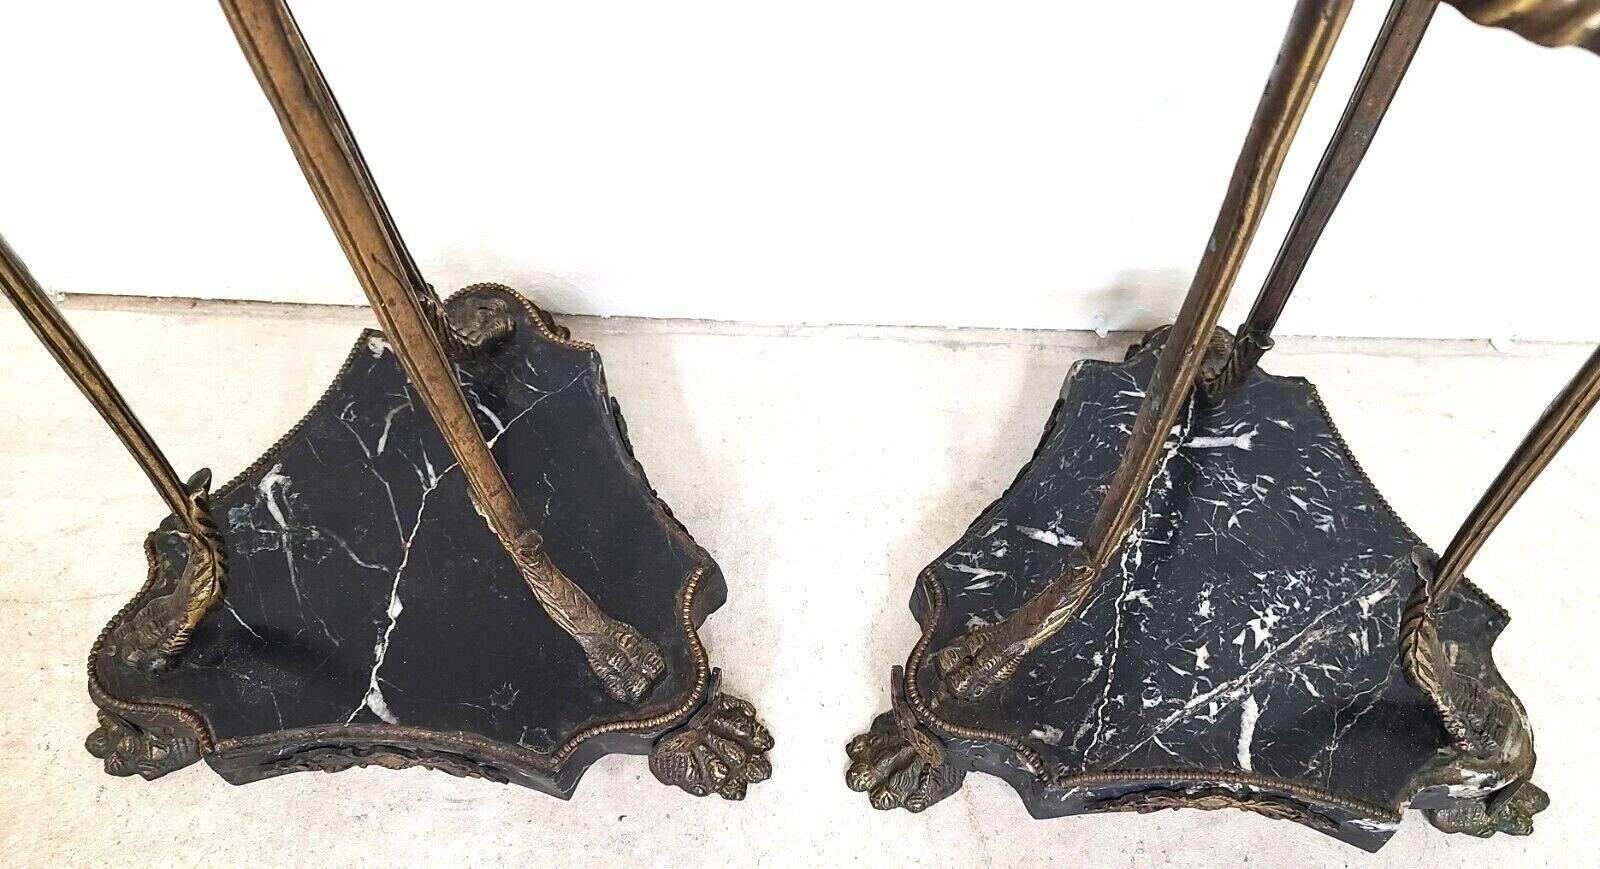 Grand Entrance Italian Brass Griffins & Marble Display Stands, a Pair For Sale 5